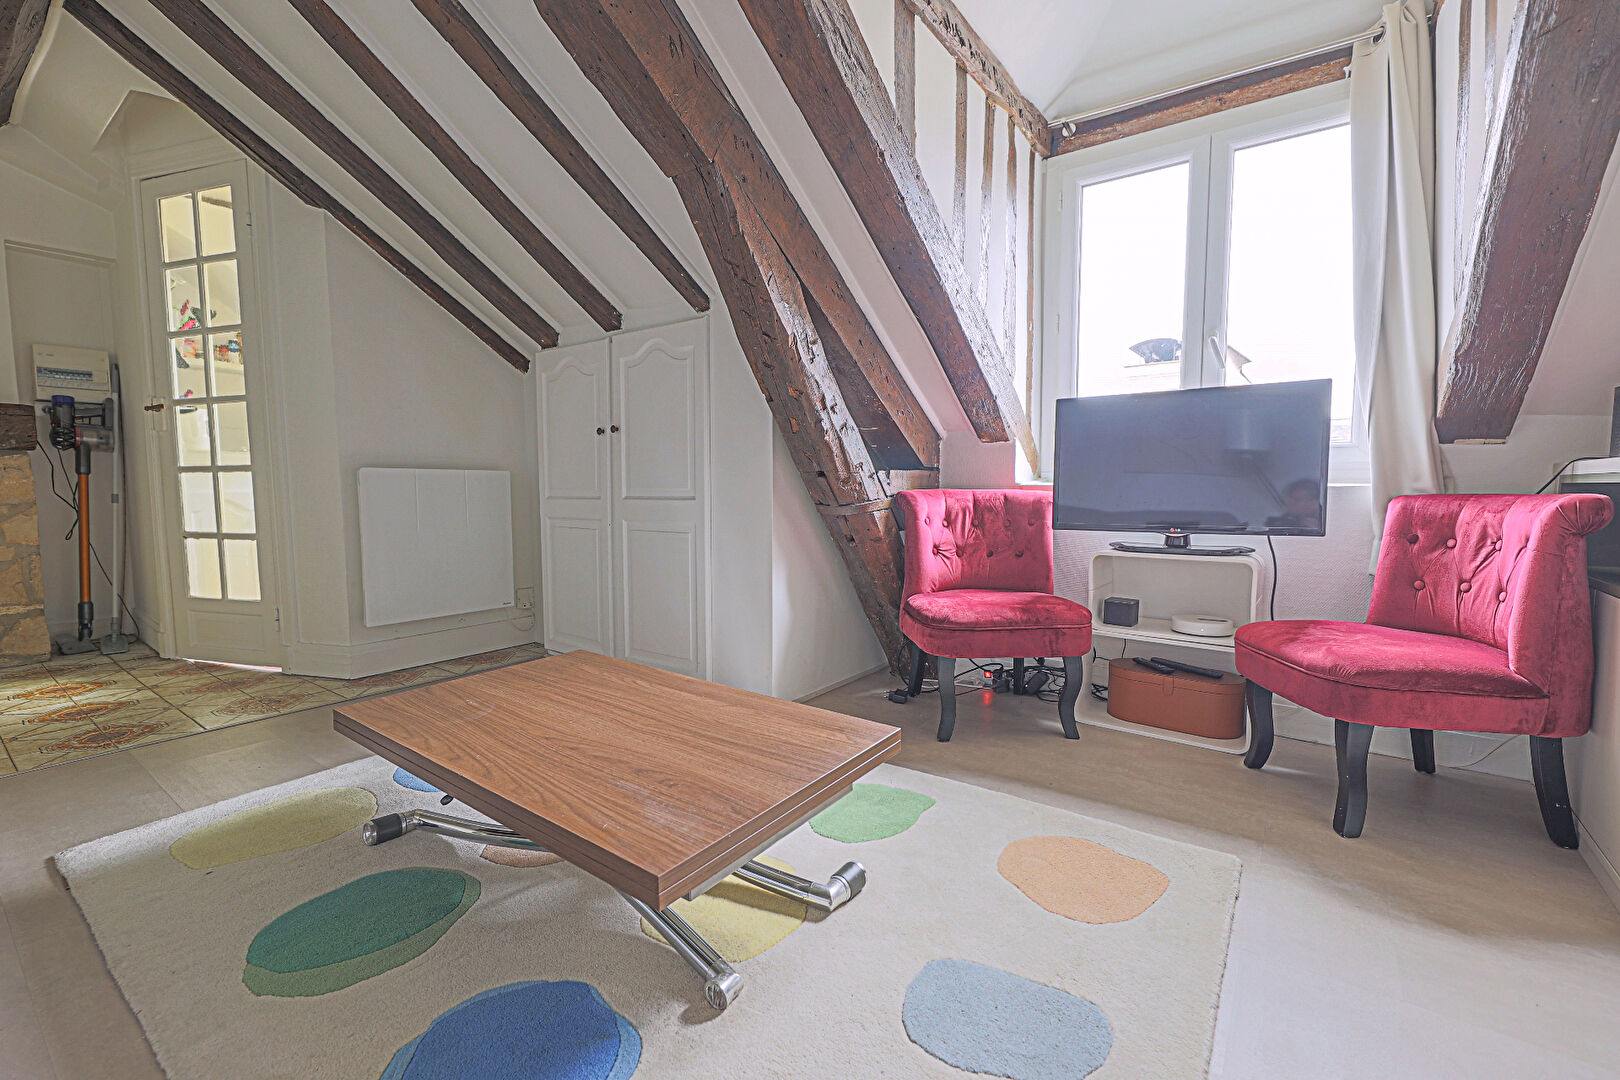 Exceptional: in the heart of the Marais, magnificent last floor studio with clear view: exceptional place to visit urgently! 3